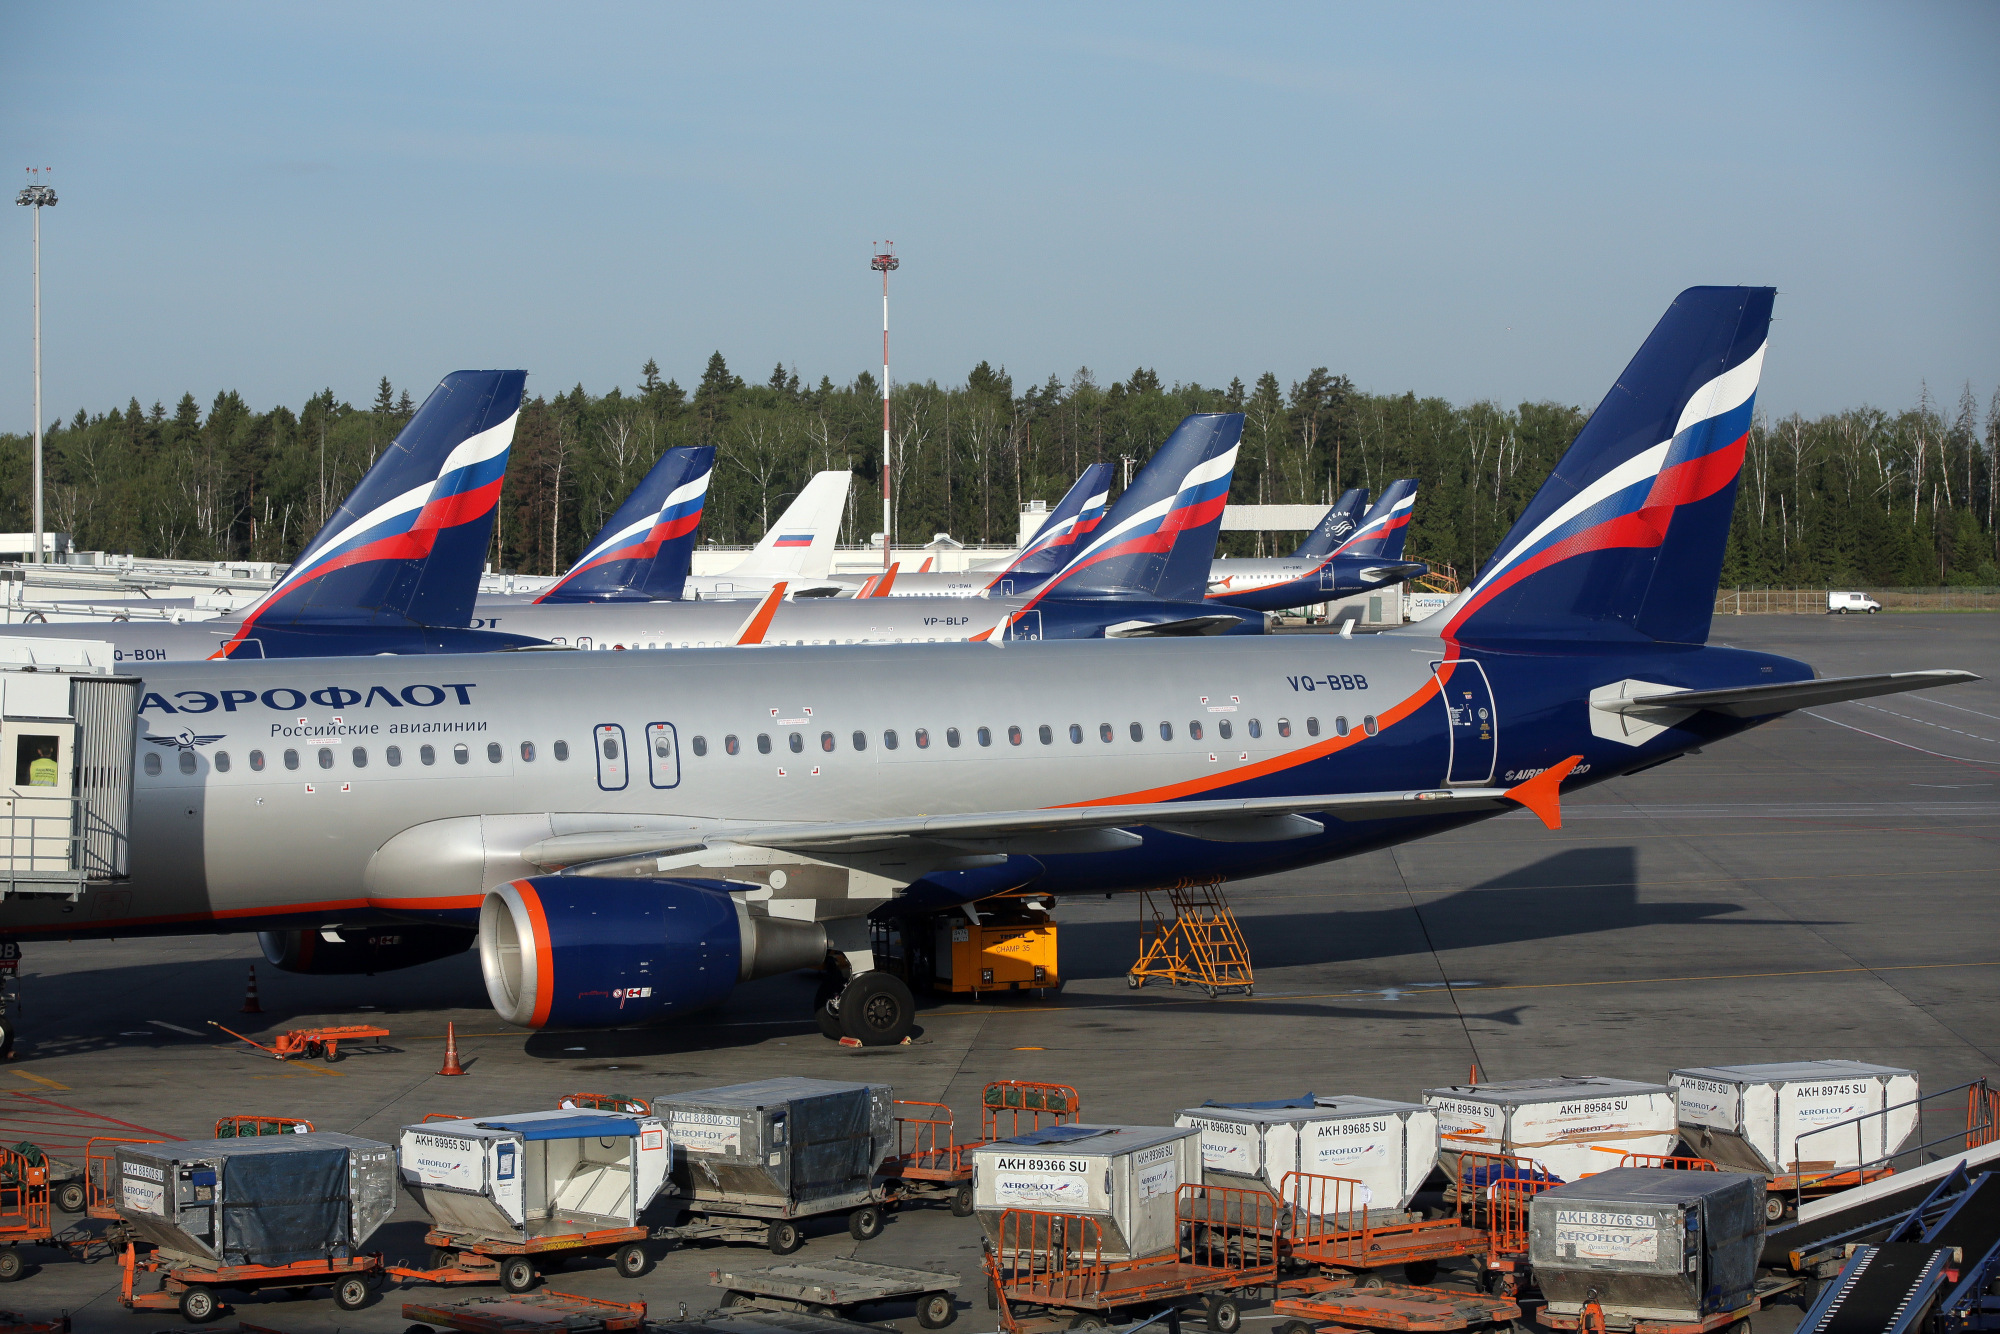 An Aeroflot-Russian International Airlines Airbus A320-214(WL) stands for pre-flight preparations at the passenger terminal at Sheremetyevo airport in Moscow, Russia, on Tuesday, May 31, 2016. President Vladimir Putin has amassed forces, including short-range ballistic missiles and anti-ship, air-defense, and electronic weaponry, in the Kaliningrad enclave that cuts into Poland's Baltic Sea coast, Lt. General Ben Hodges, the commander of U.S. Army forces in Europe, said in December.